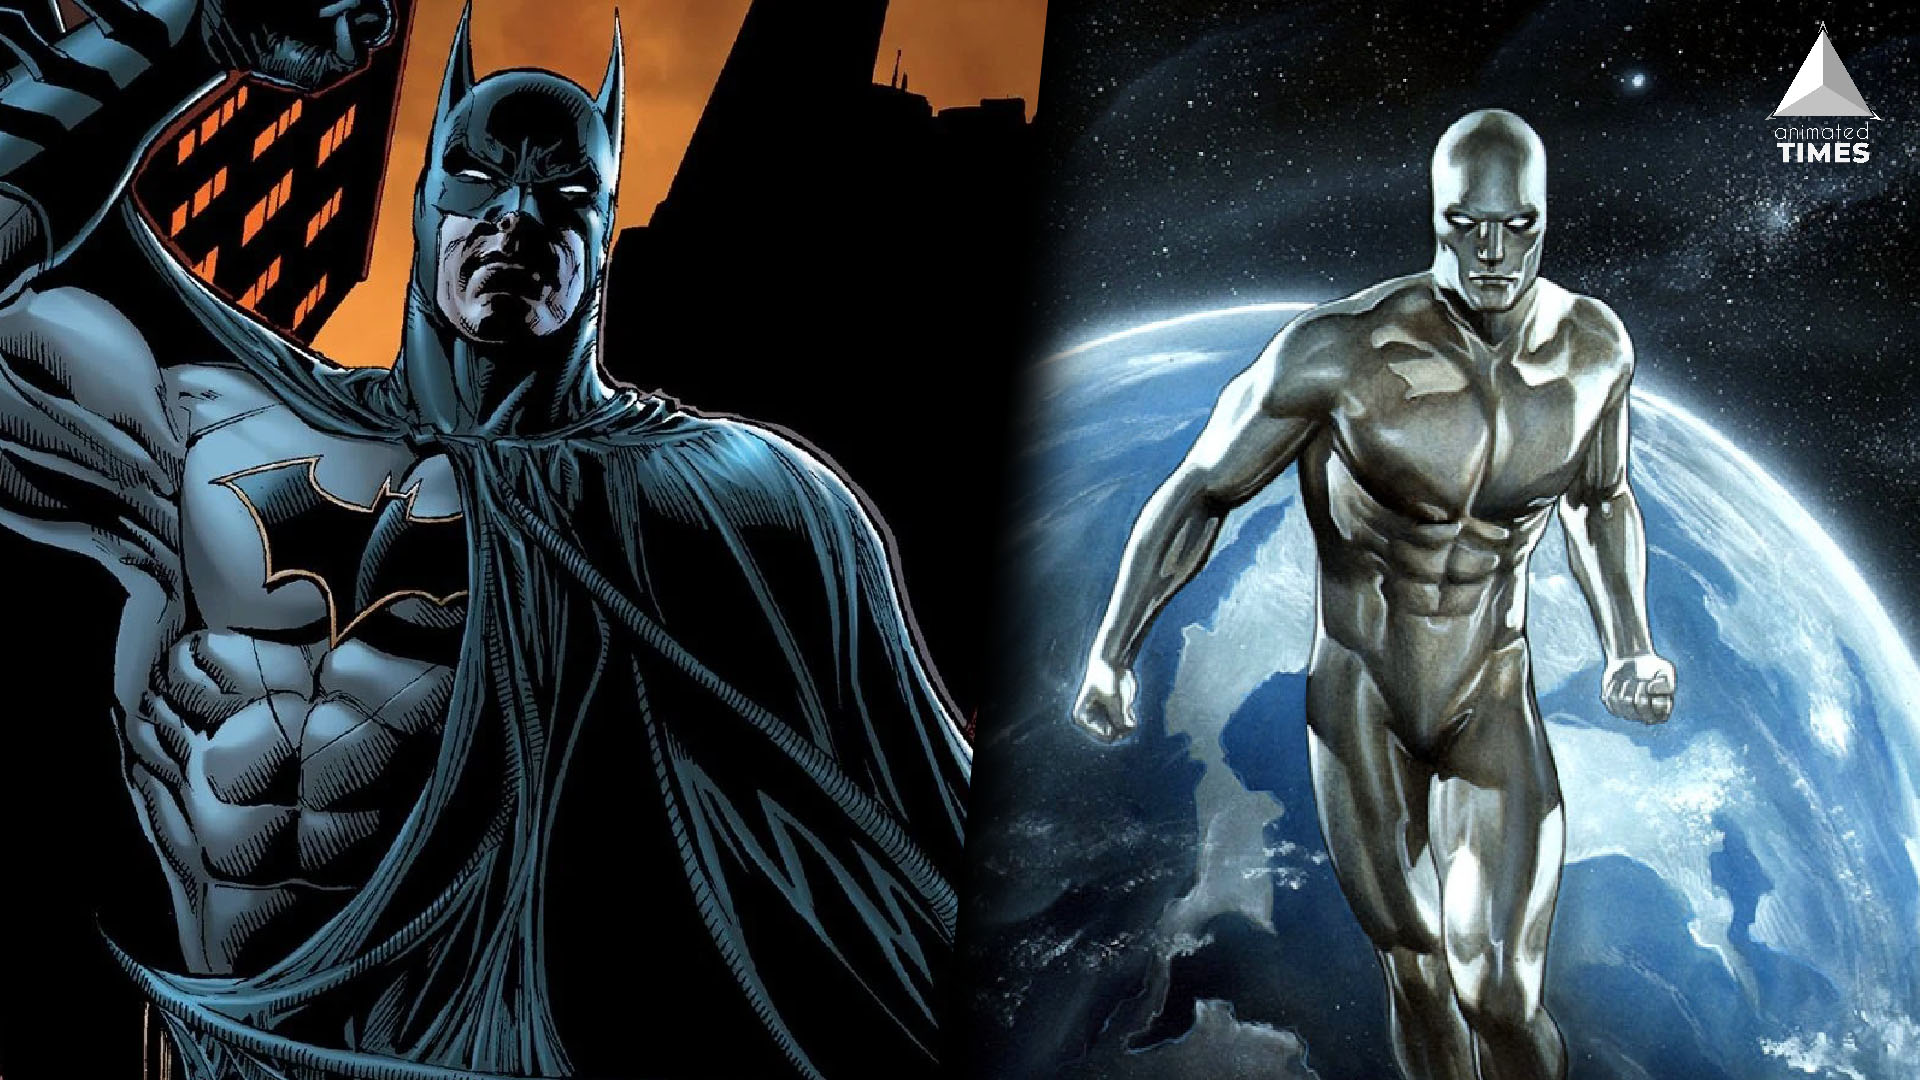 DC's New Superhero Fusion of Batman and Silver Surfer!! - Animated Times